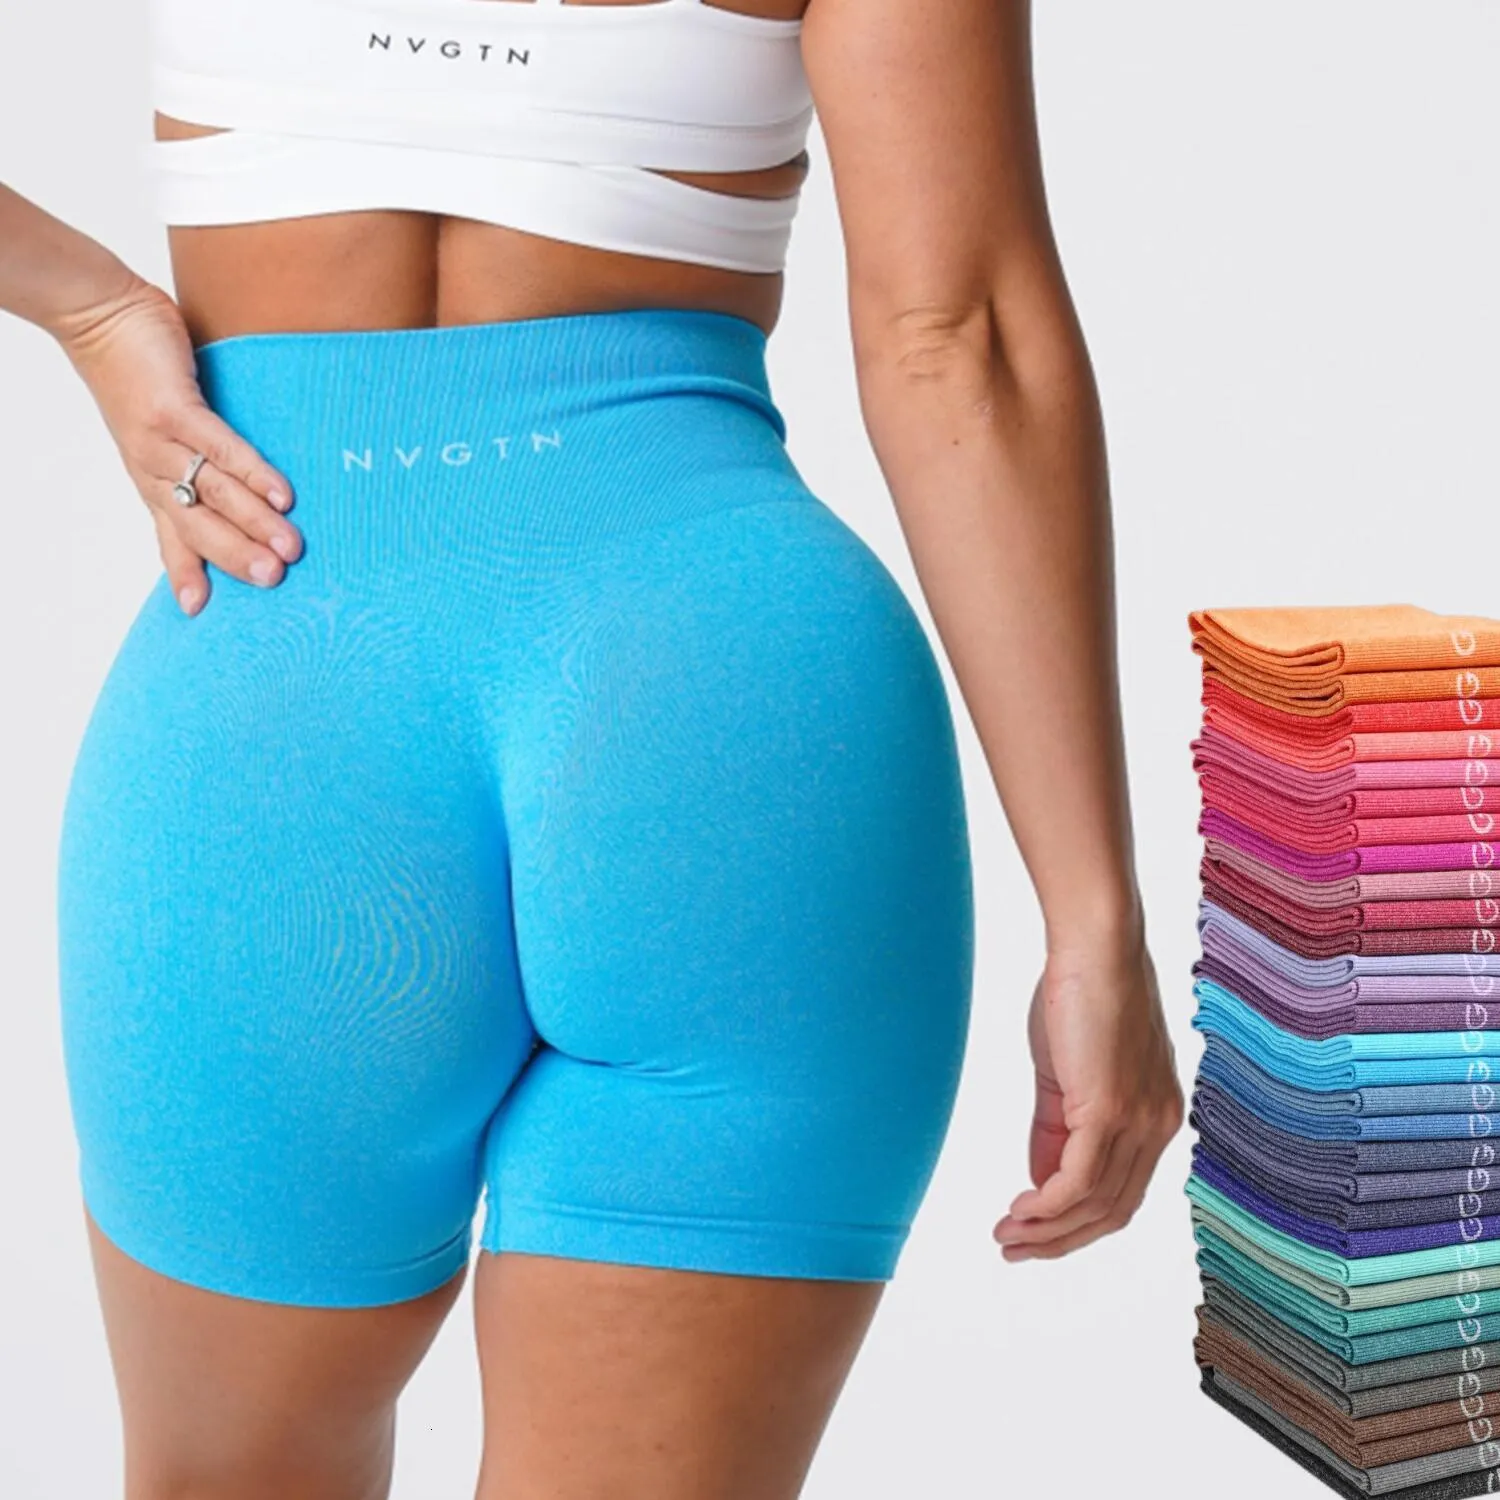 Seamless Seamless Yoga Shorts For Women NvGTN Pro Shirts And Leggings For  Summer Workout, Biker Pants, Exercise, Sports, Fitness Outfits Gym Clothes  Nylon 230701 From Shenping03, $24.32